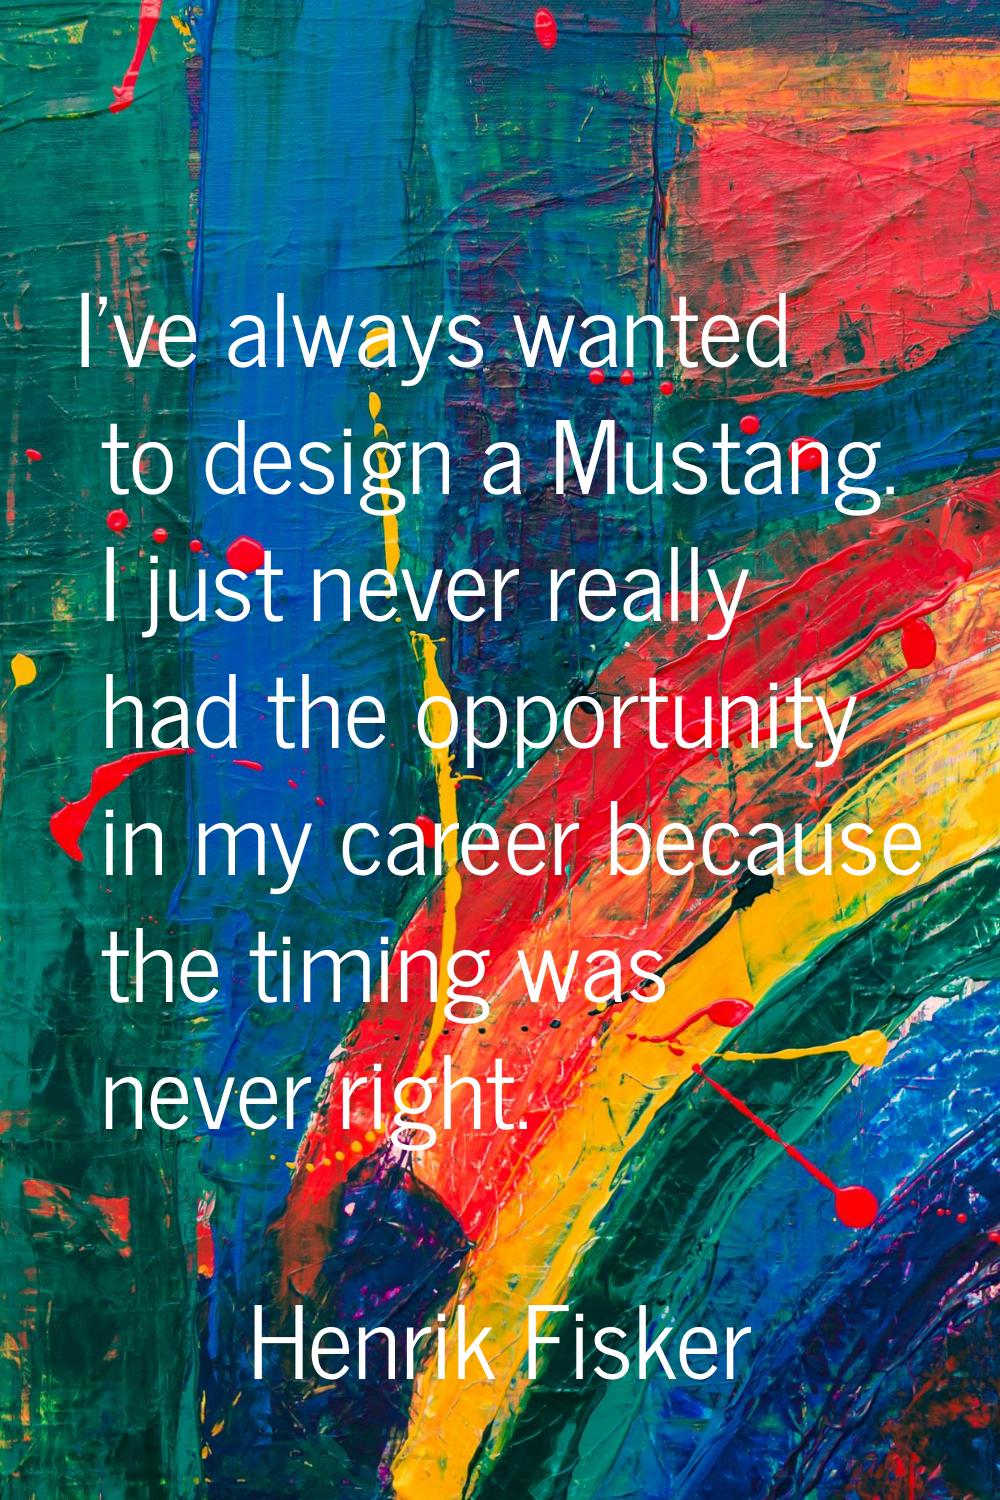 I've always wanted to design a Mustang. I just never really had the opportunity in my career becaus